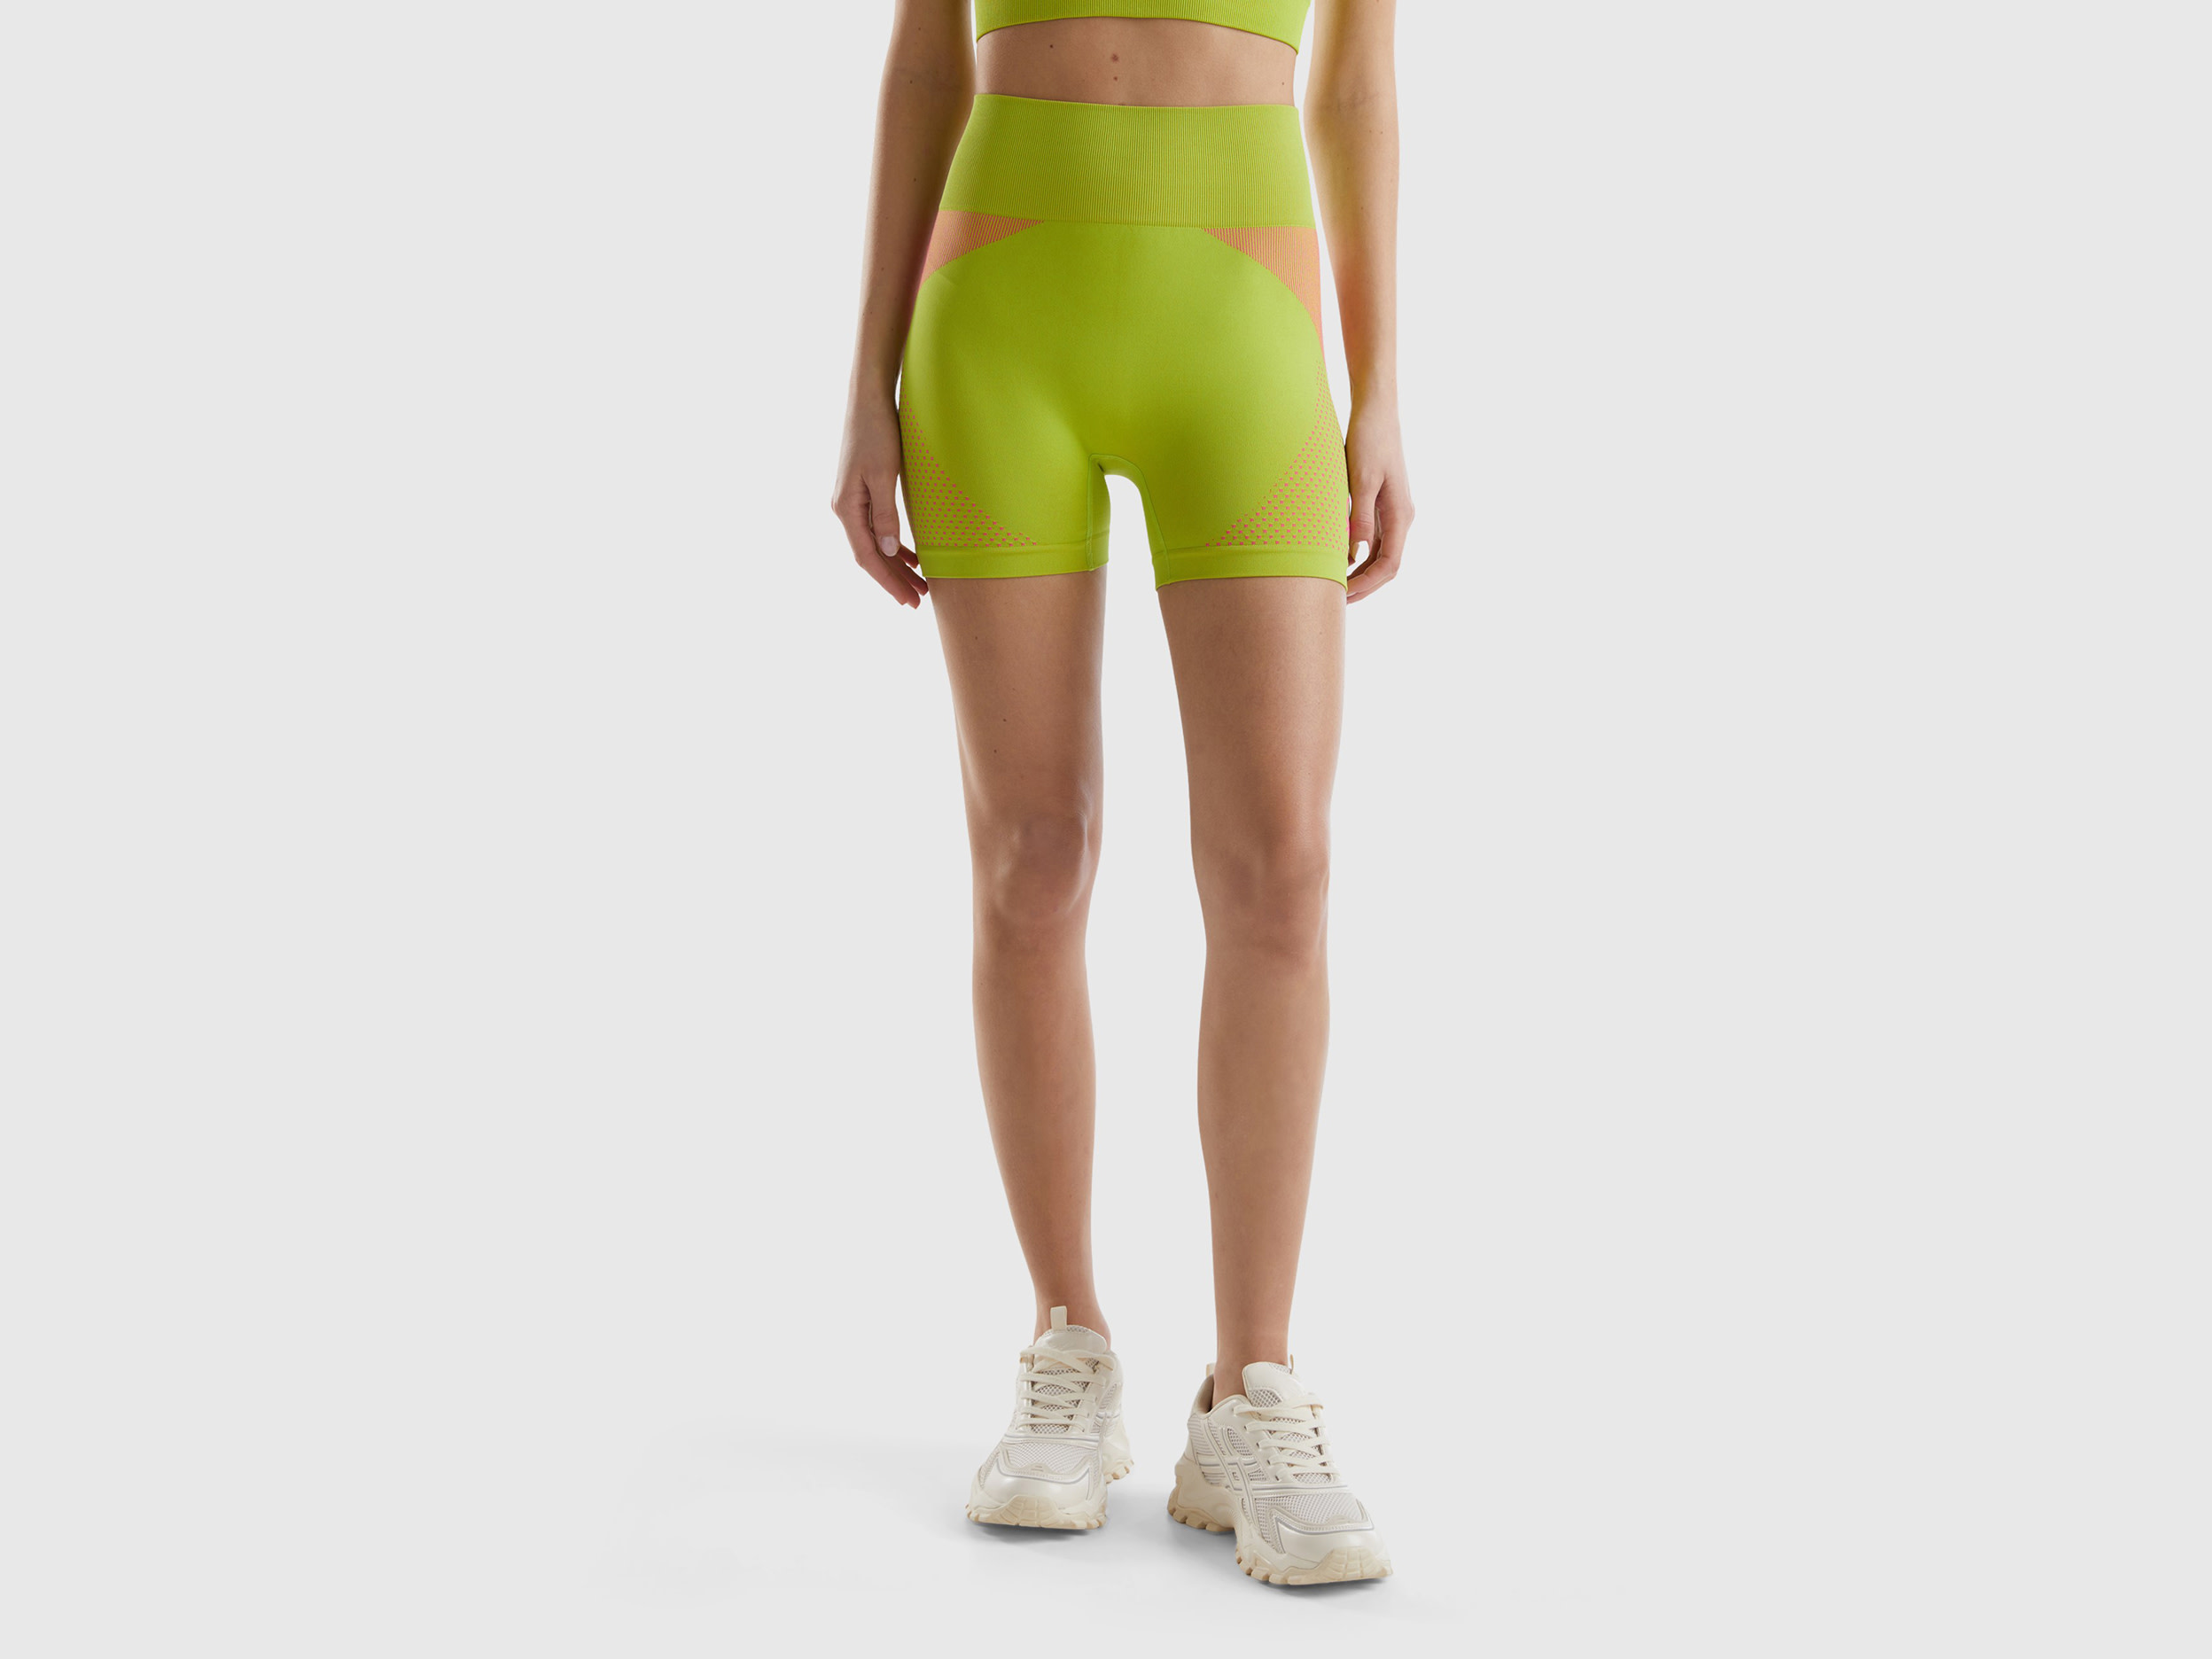 Image of Benetton, Seamless Sports Shorts, size S, Lime, Women